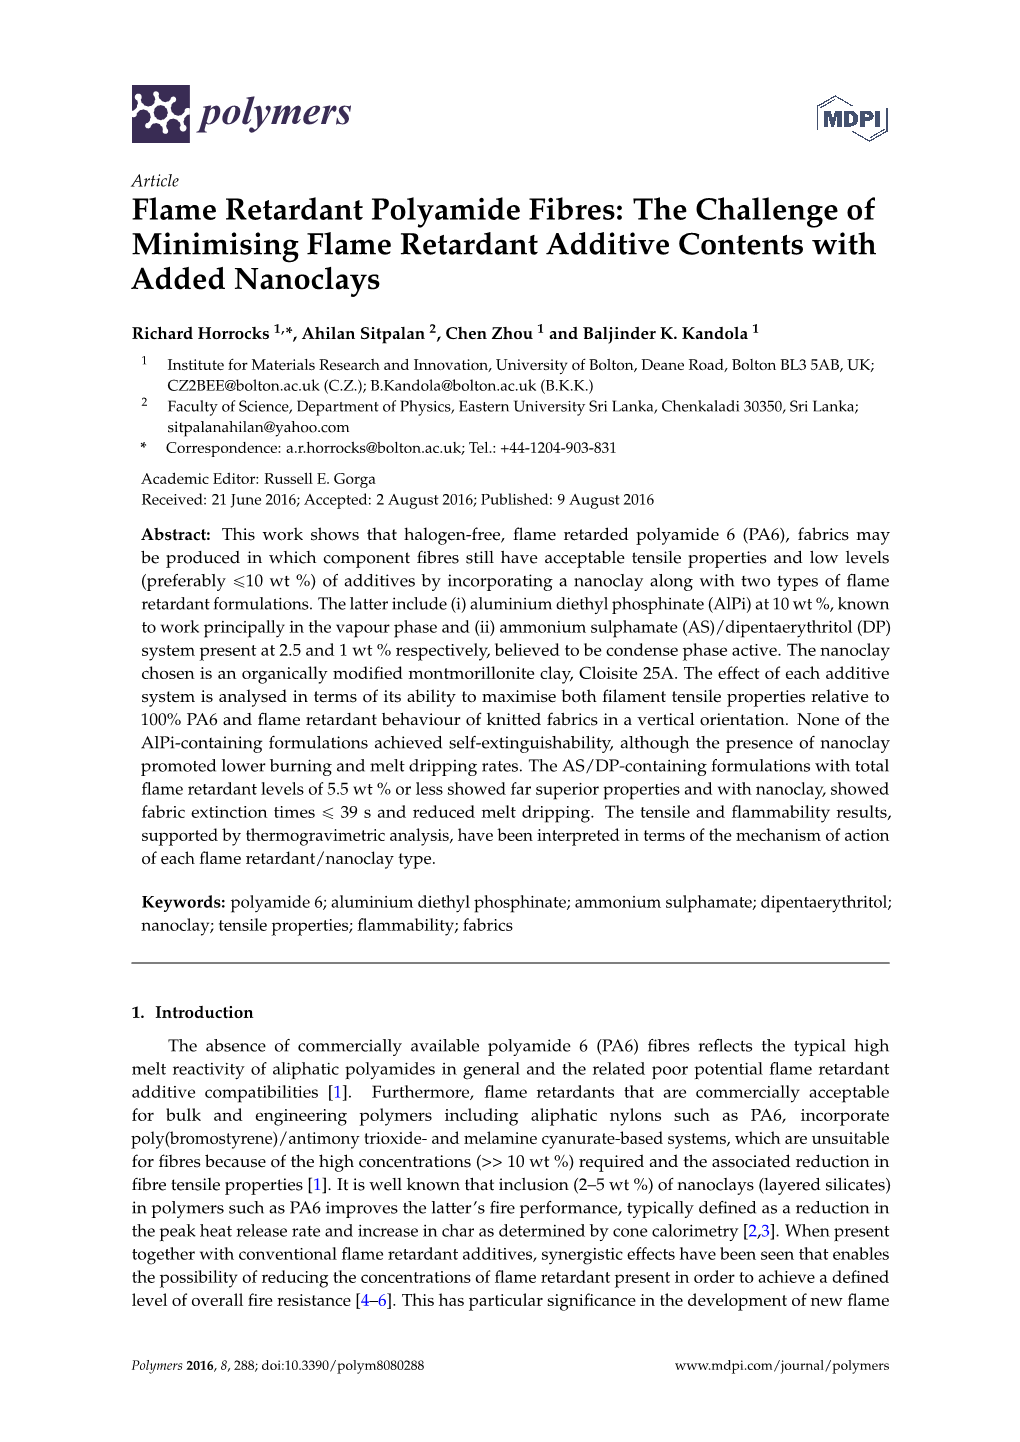 Flame Retardant Polyamide Fibres: the Challenge of Minimising Flame Retardant Additive Contents with Added Nanoclays